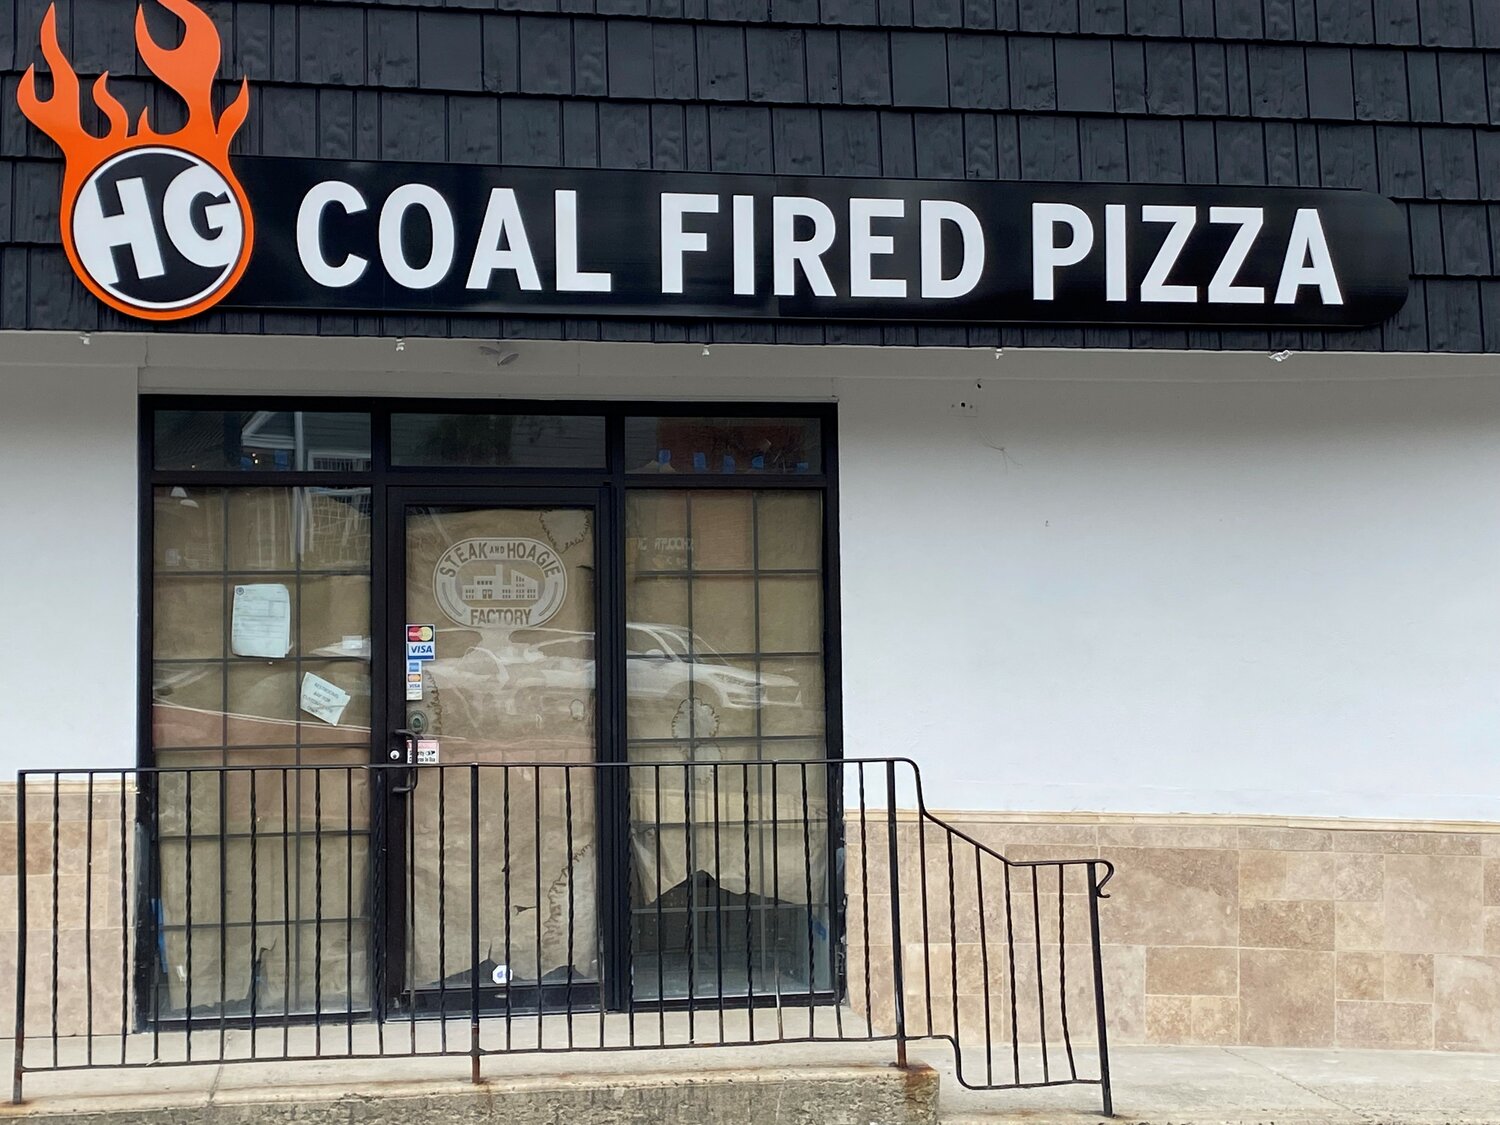 A new pizza place is coming to Doylestown Borough. HG Coal Fired Pizza is moving into the former Steak and Hoagie restaurant on South Main Street.